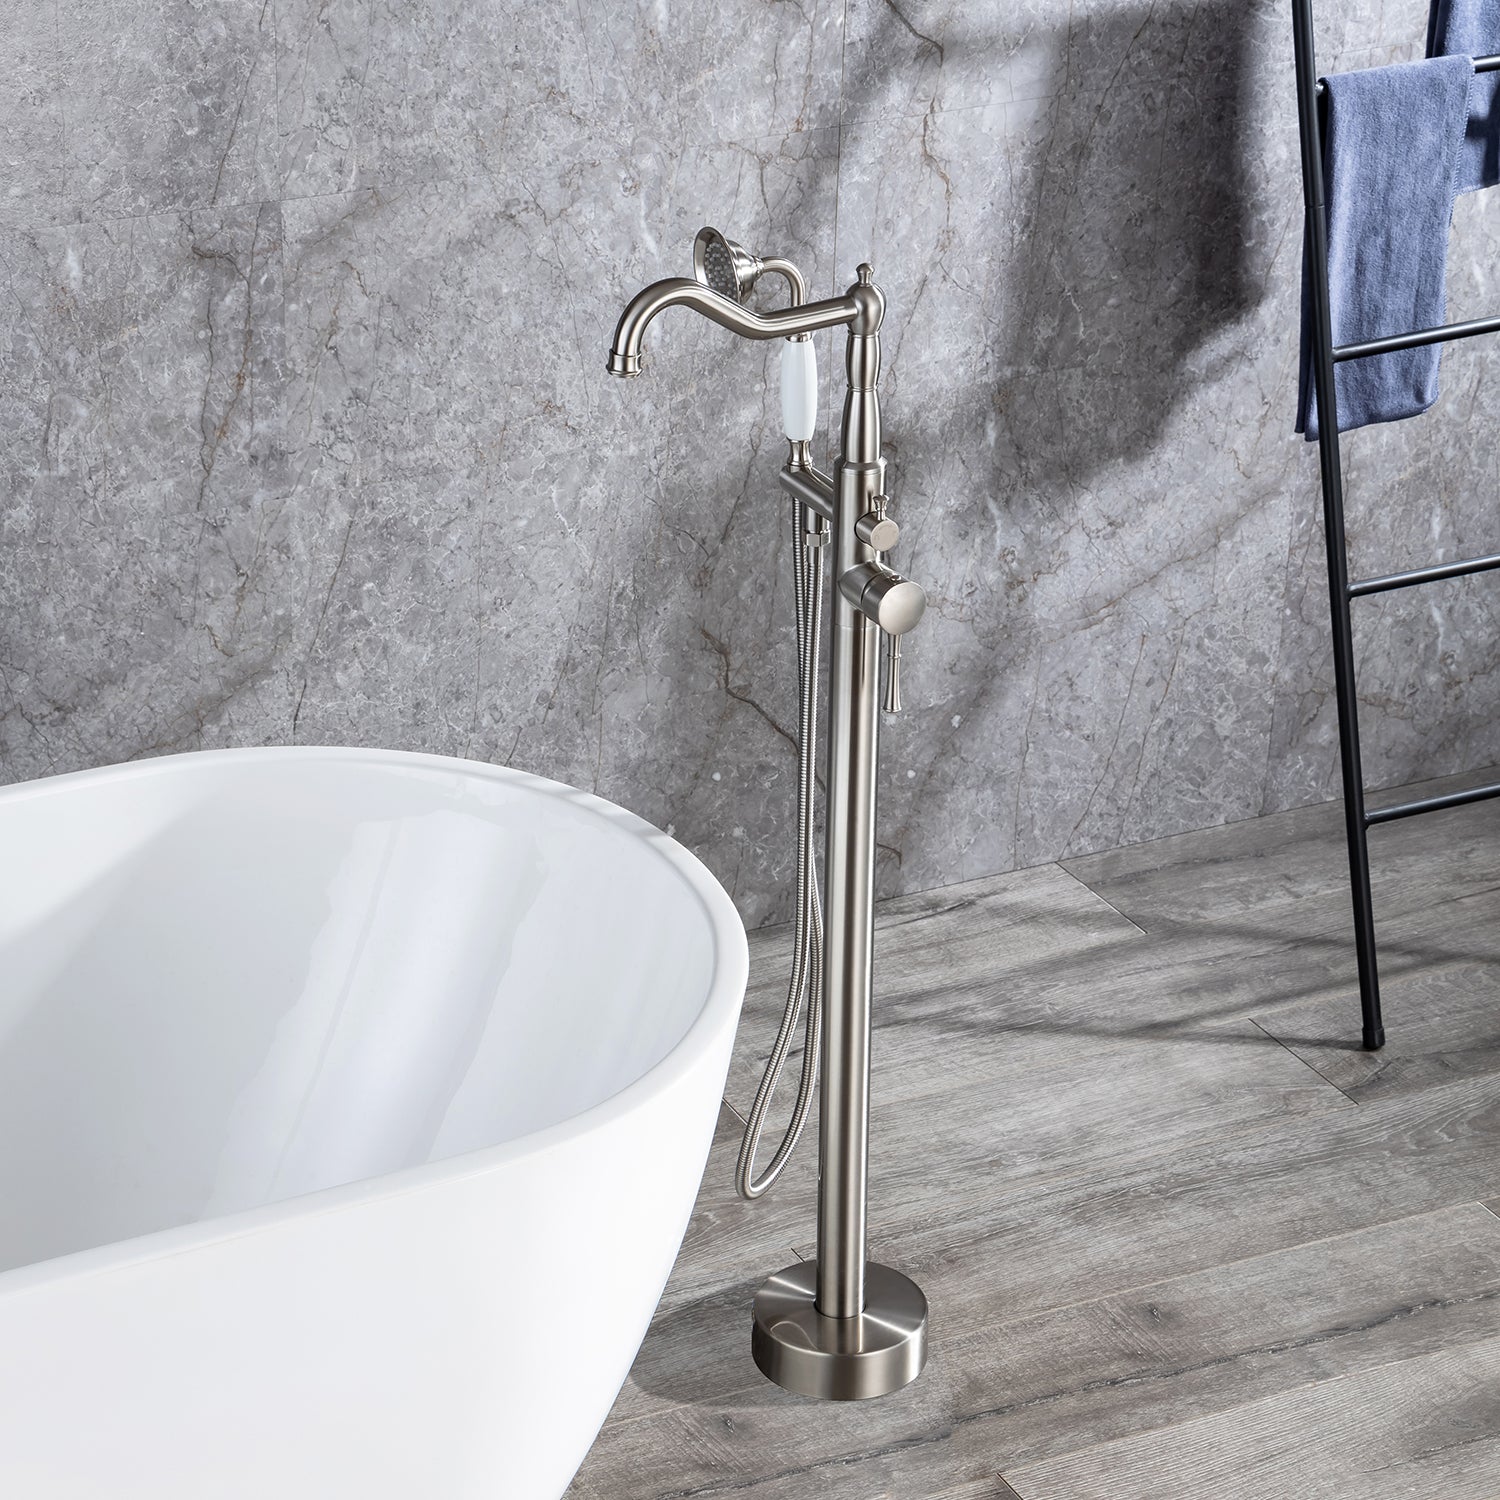 Single Handle Floor Mounted Clawfoot Tub Faucet with Handheld Shower RX8009